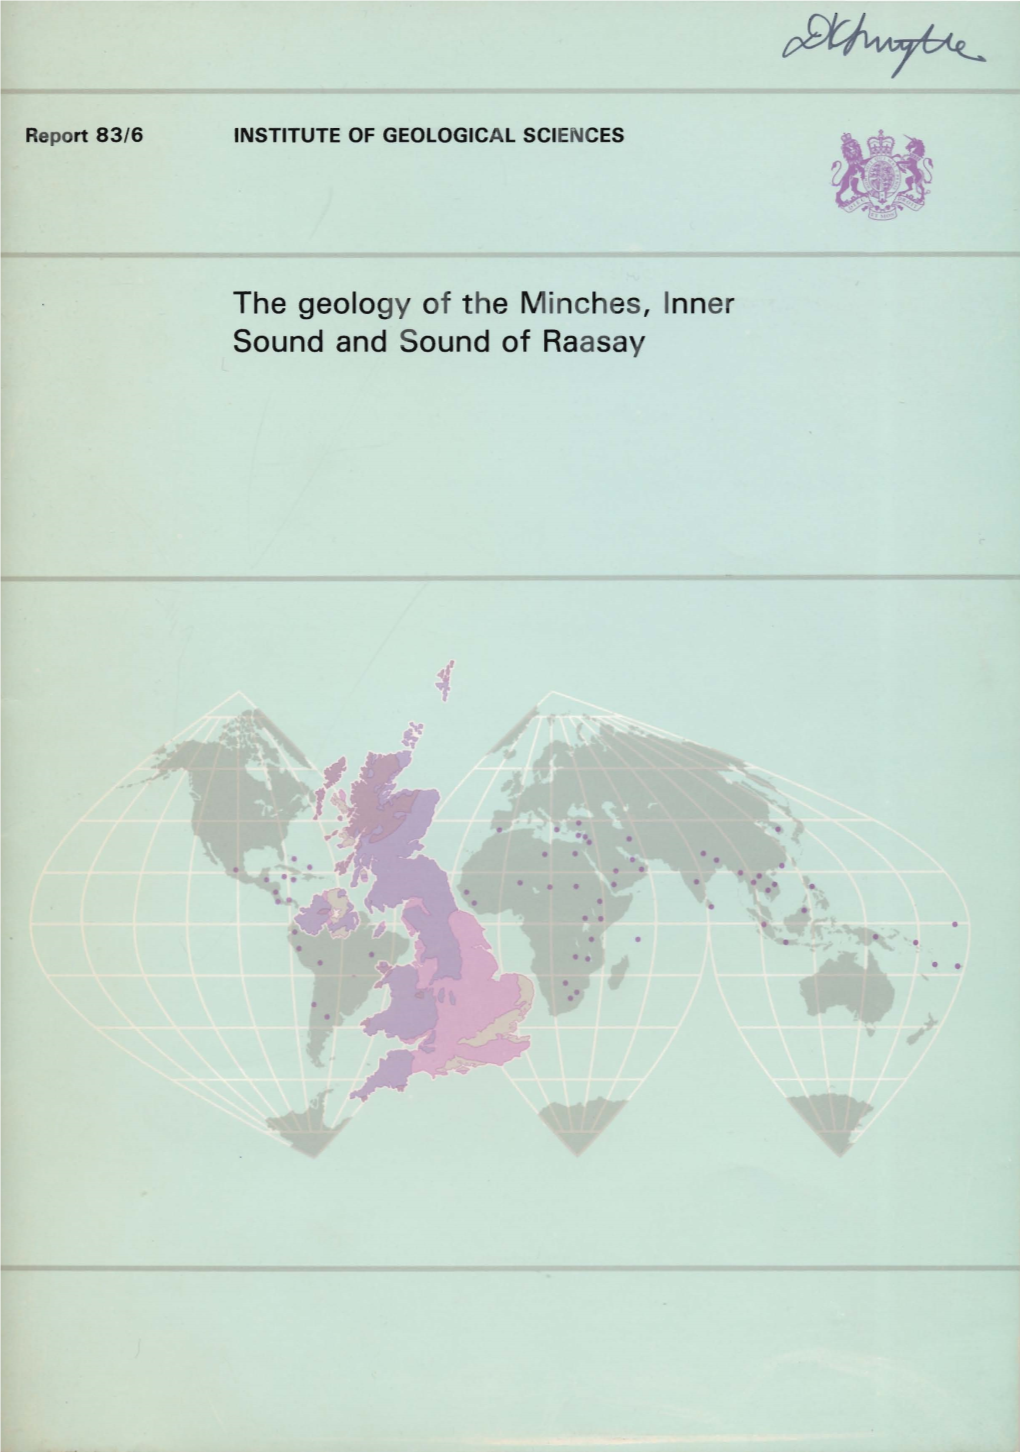 The Geology of the Minches, Inner Sound and Sound of Raasay